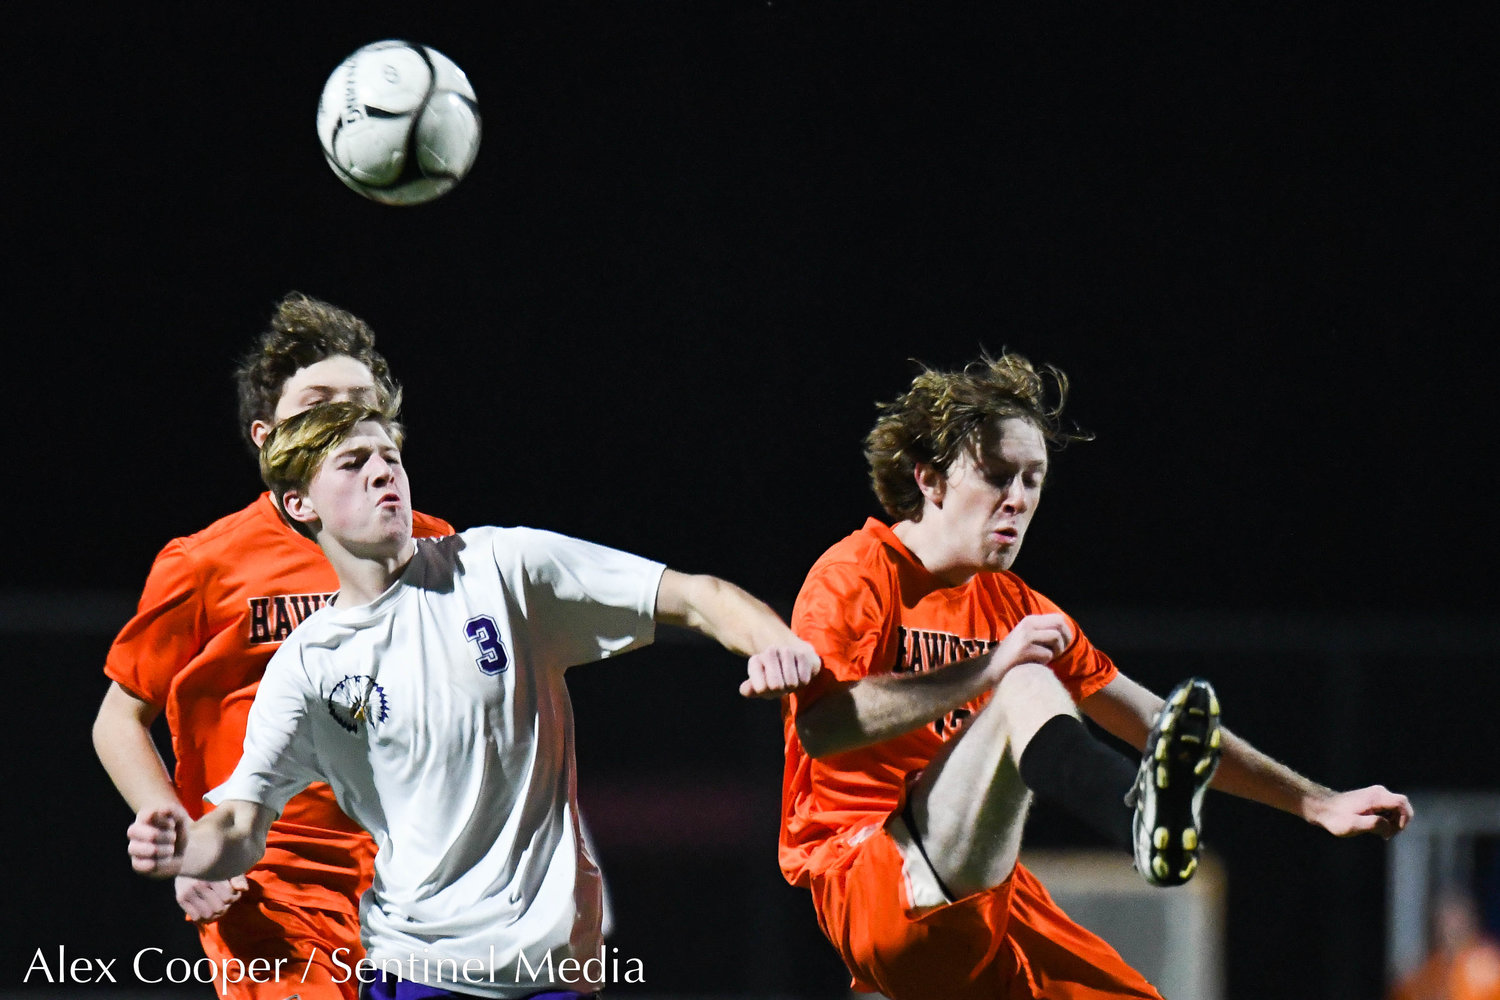 Cooperstown battles Waterville for the Section III Class C final on Tuesday, Nov. 1 at VVS High School. Cooperstown won 1-0 in overtime.